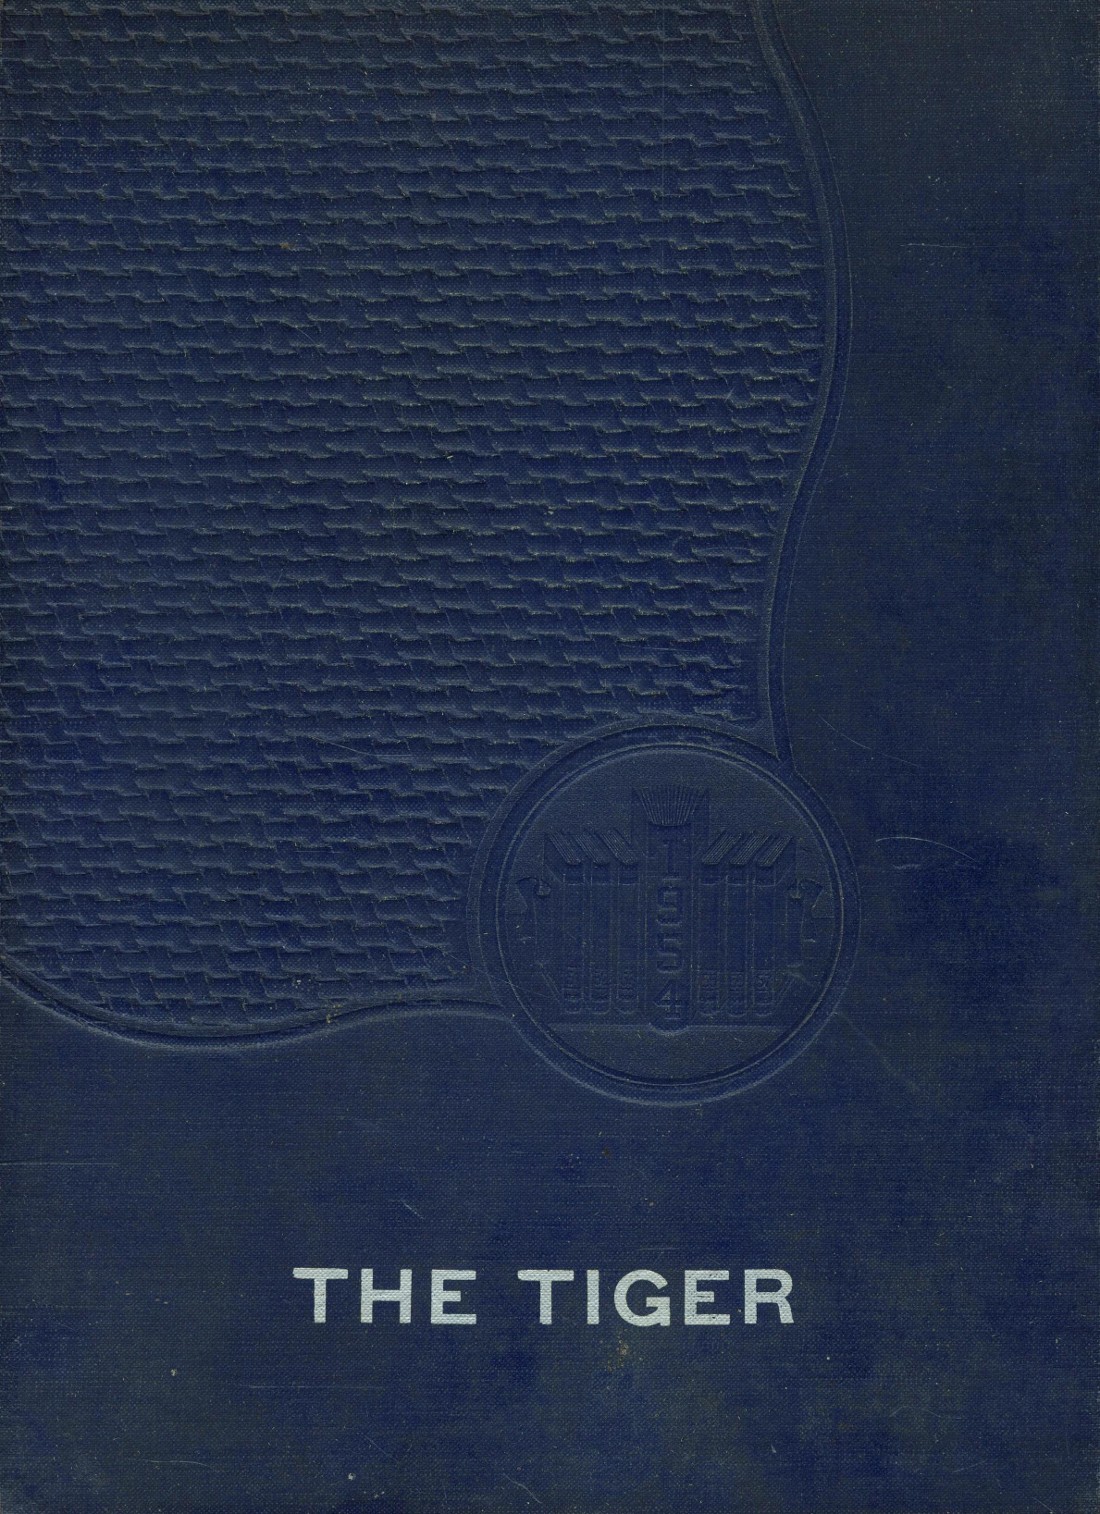 1954 yearbook from Gardner High School from Strong, Arkansas for sale